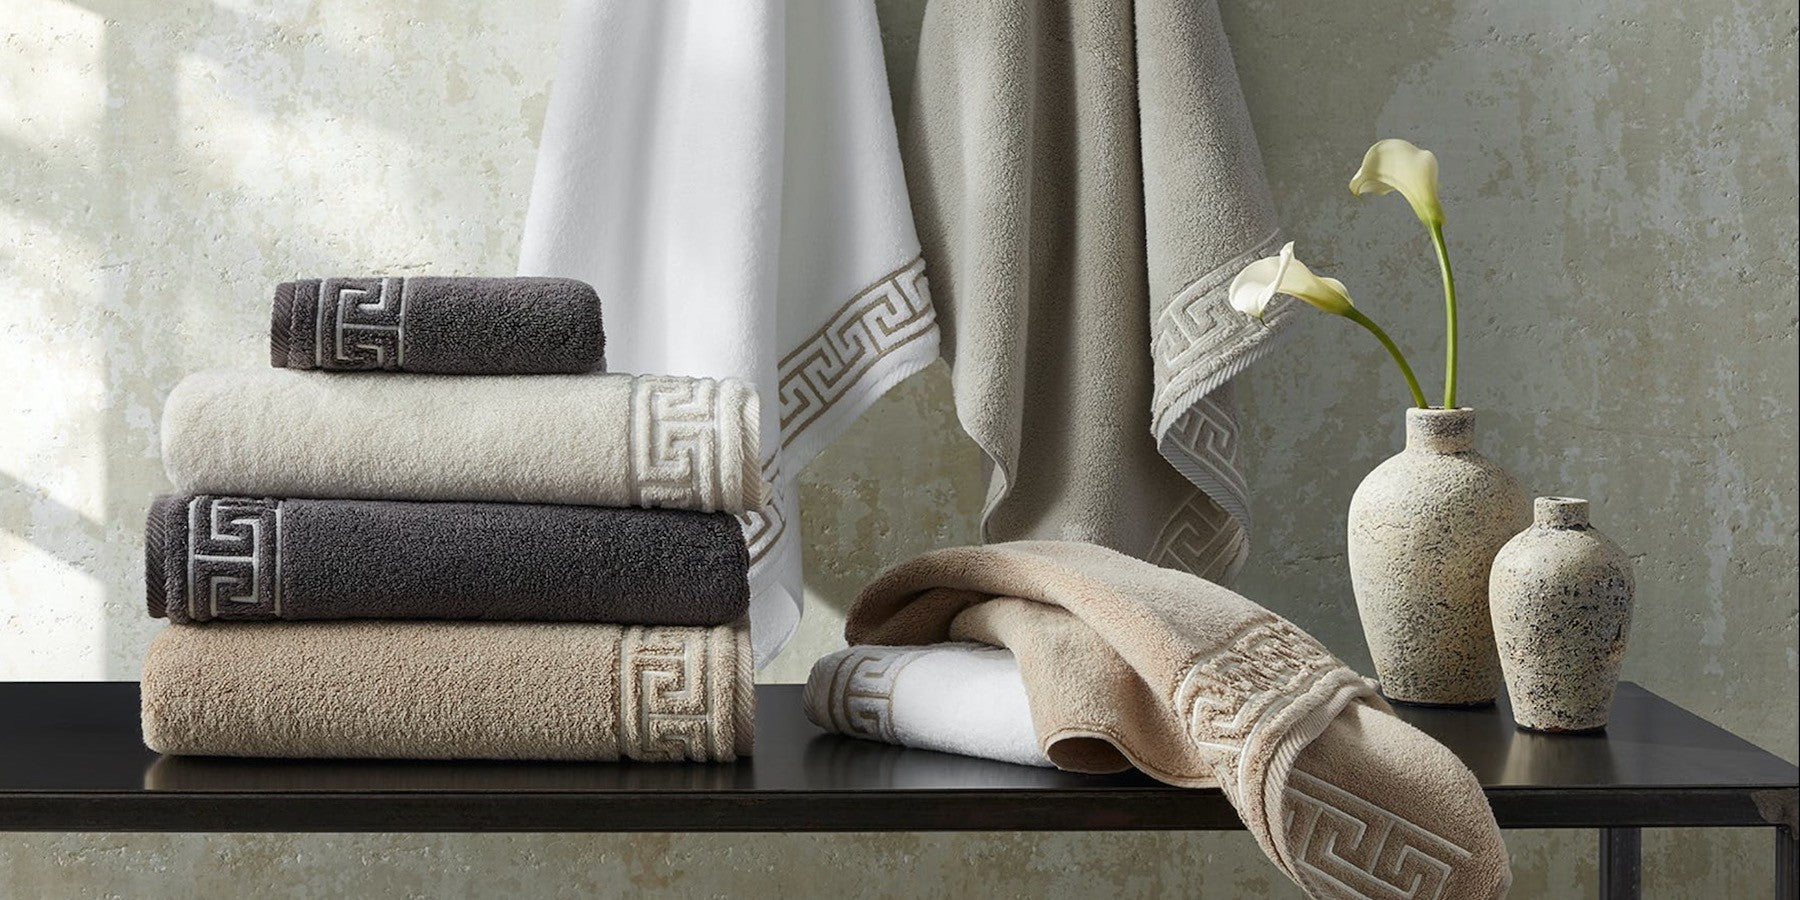 Matouk Bath Towels at Fig Linens and Home. Explore Matouk Towels from Terry Cloth Milagro, Cairo, Cairo Scallop & Lotus to embroidered and taped bath towels Adelphi, Gordian Knot, Classic Chain and Daphne. Bath Towels, Hand Towels, Washcloths